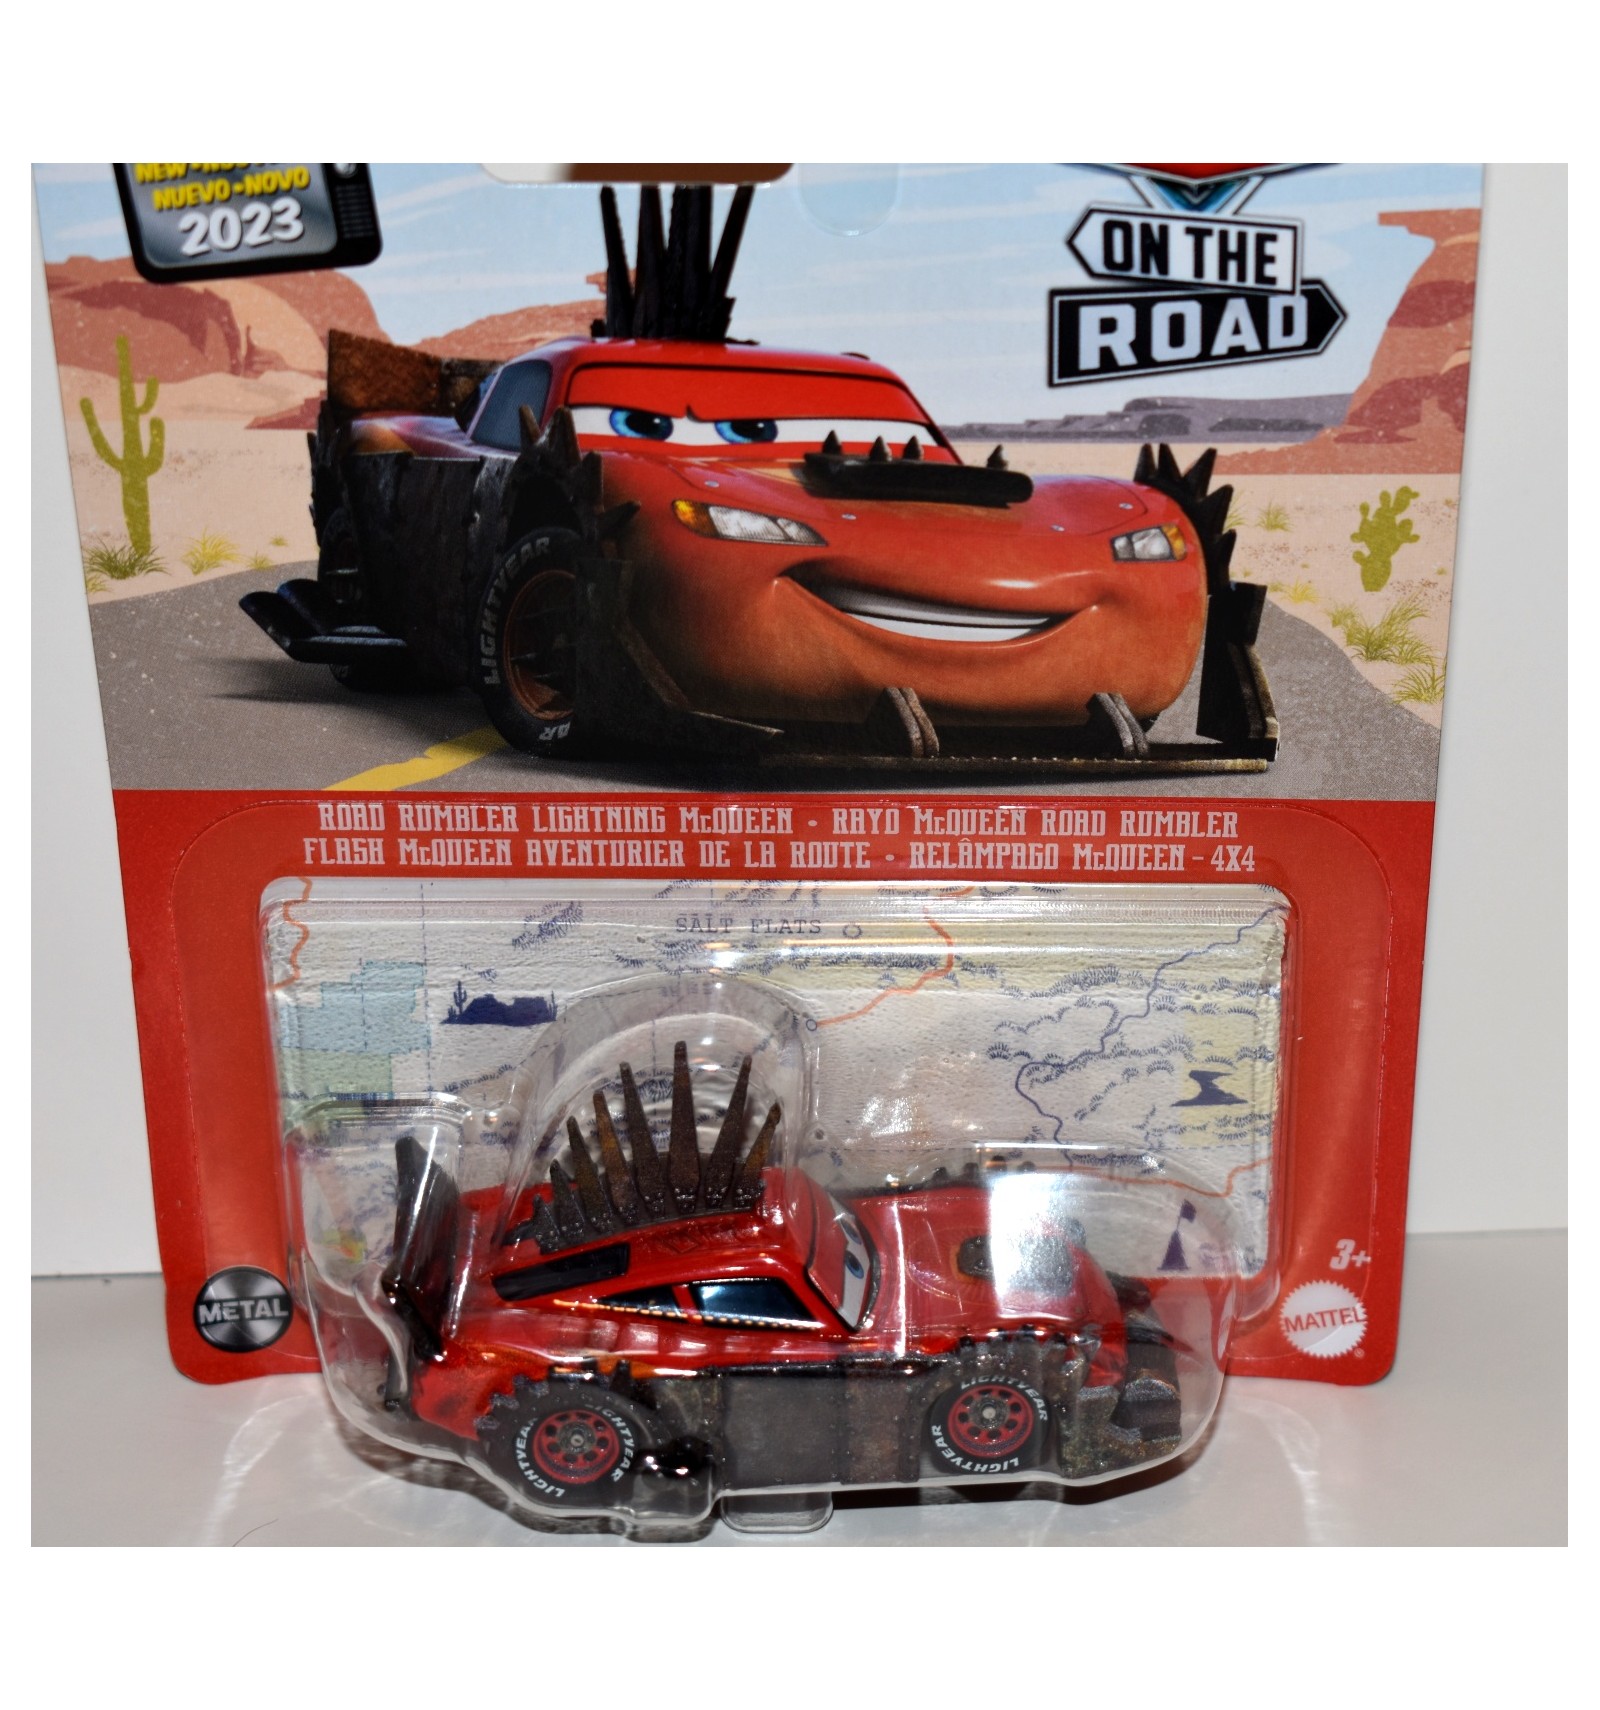 Disney Pixar Cars Character Cars on the Road - Road Trip Lightning McQueen